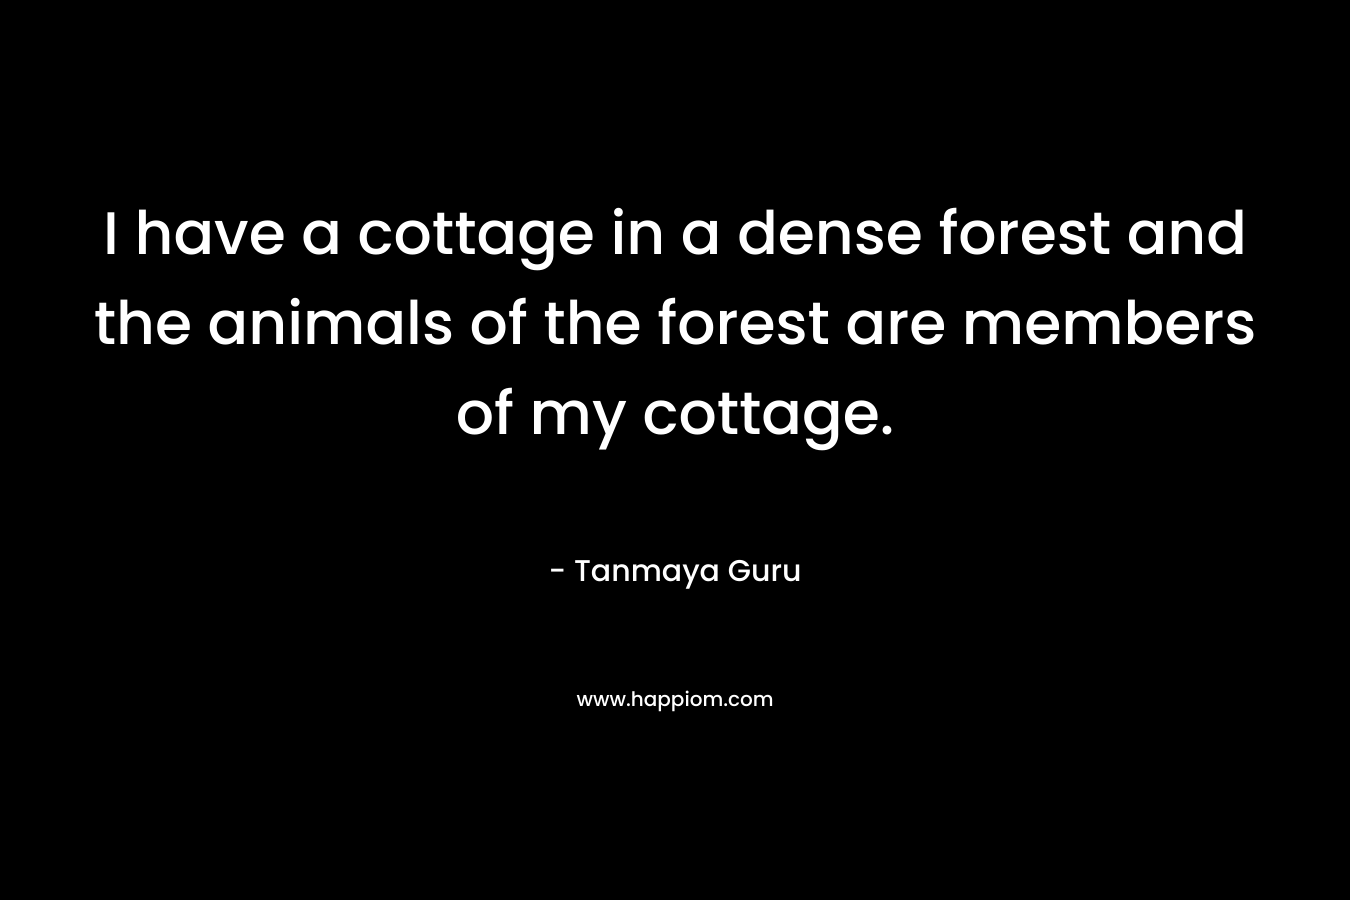 I have a cottage in a dense forest and the animals of the forest are members of my cottage. – Tanmaya Guru